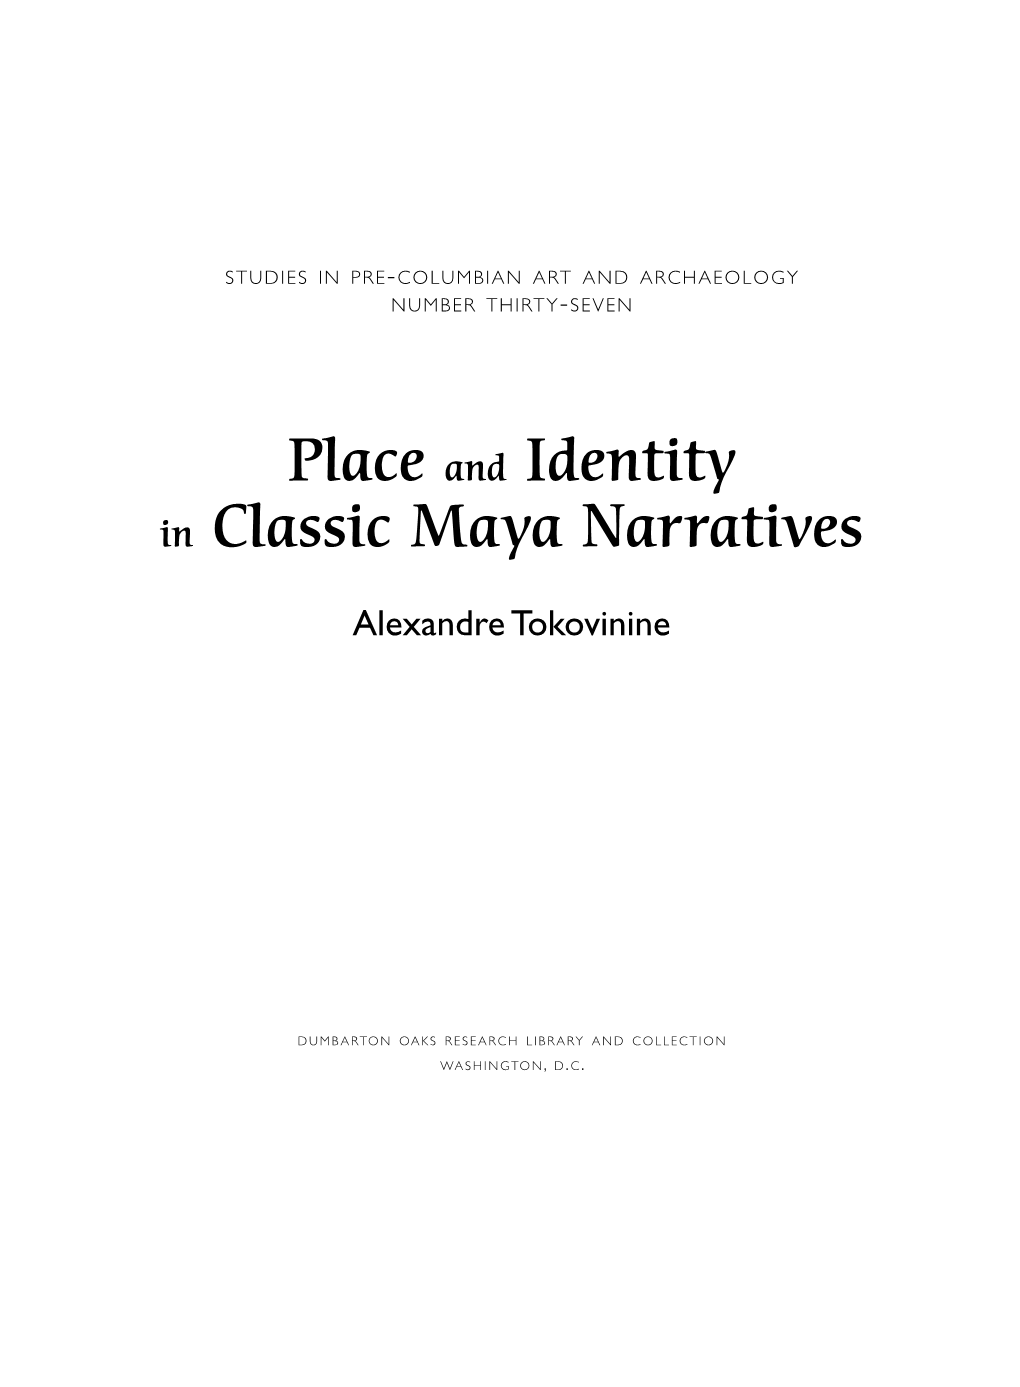 Place and Identity in Classic Maya Narratives